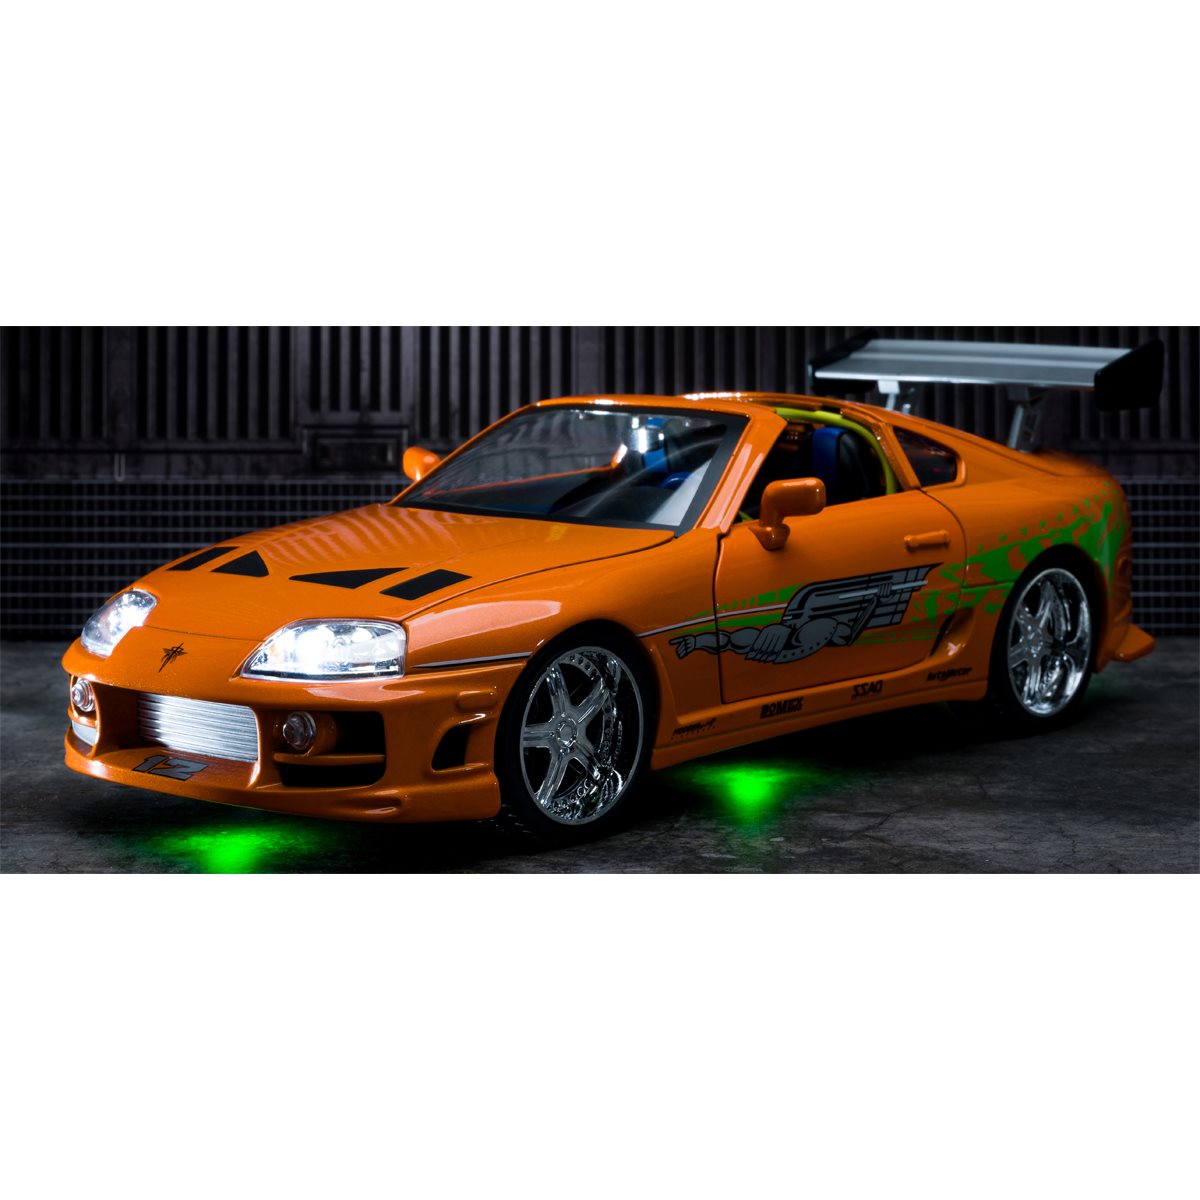 Paul Walker's Toyota Supra in 'The Fast and the Furious' up for